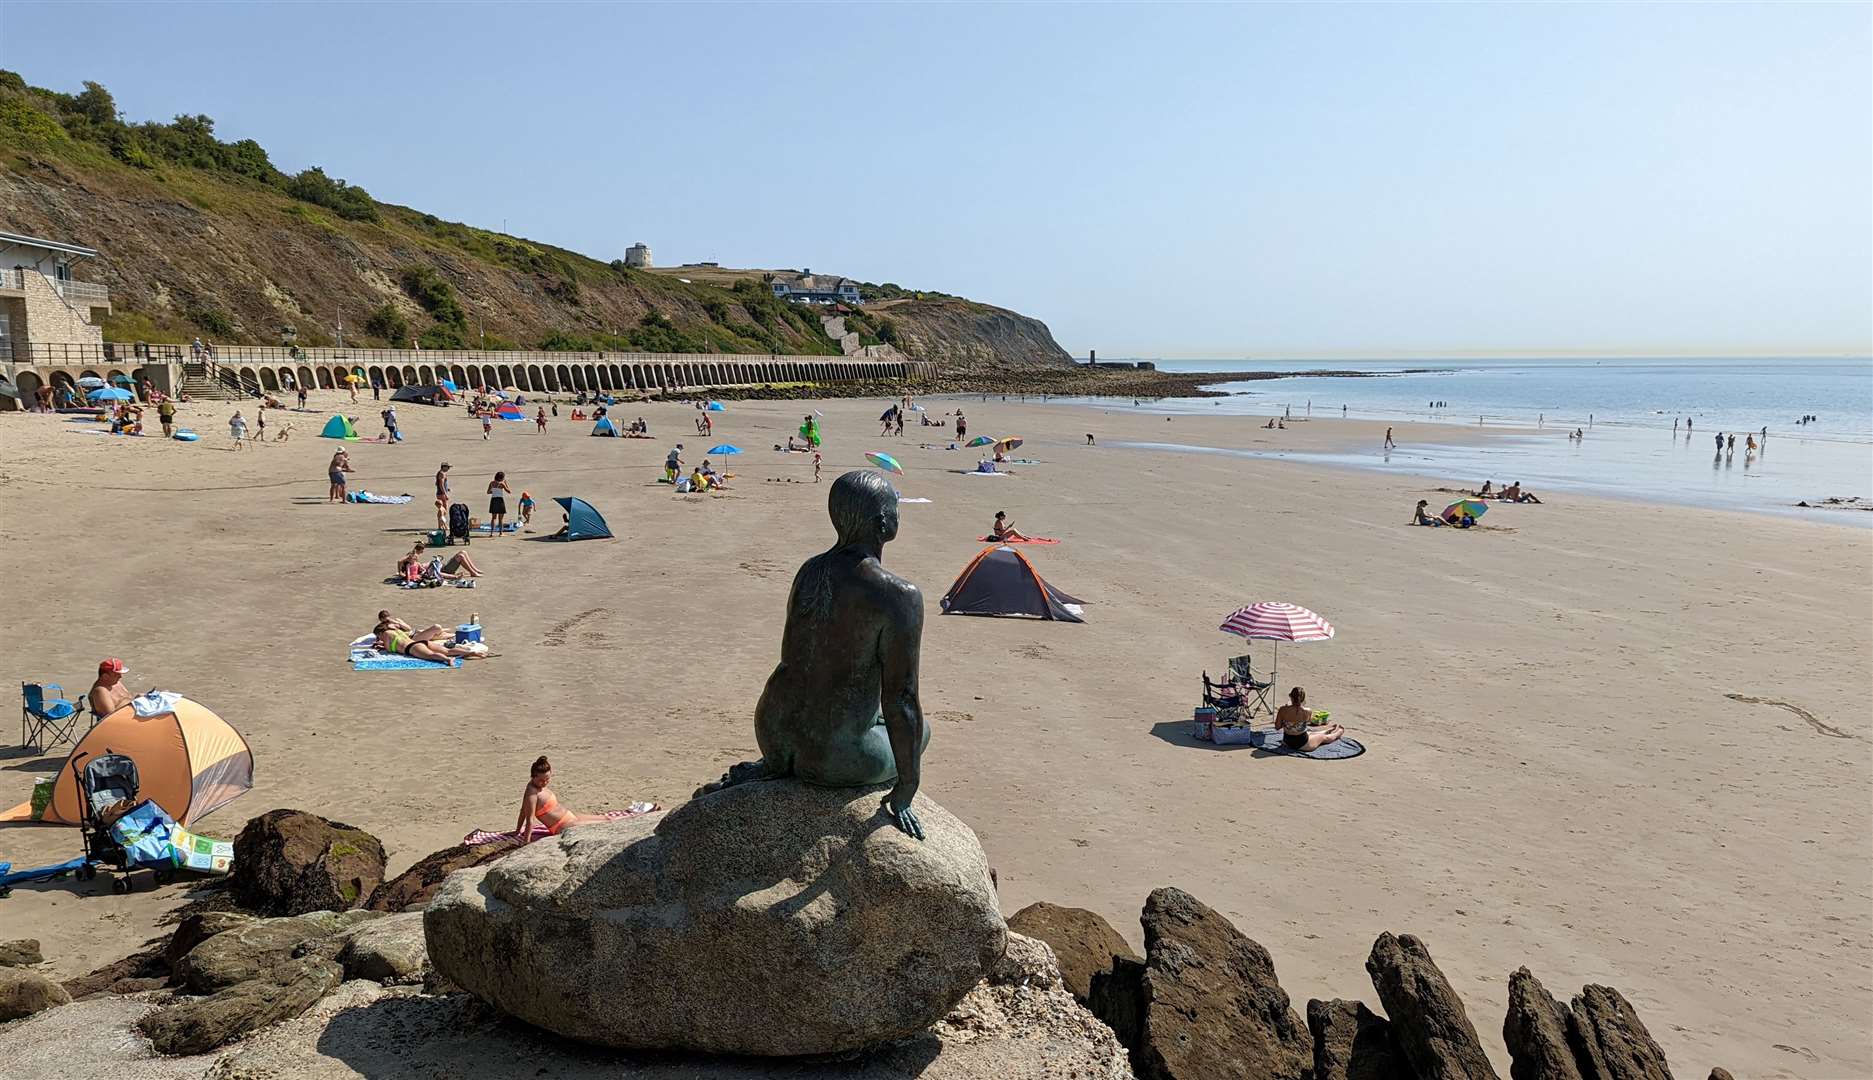 Despite a heat health warning, there were plenty of people on Sunny Sands beach in Folkestone during the heatwave of July 2022